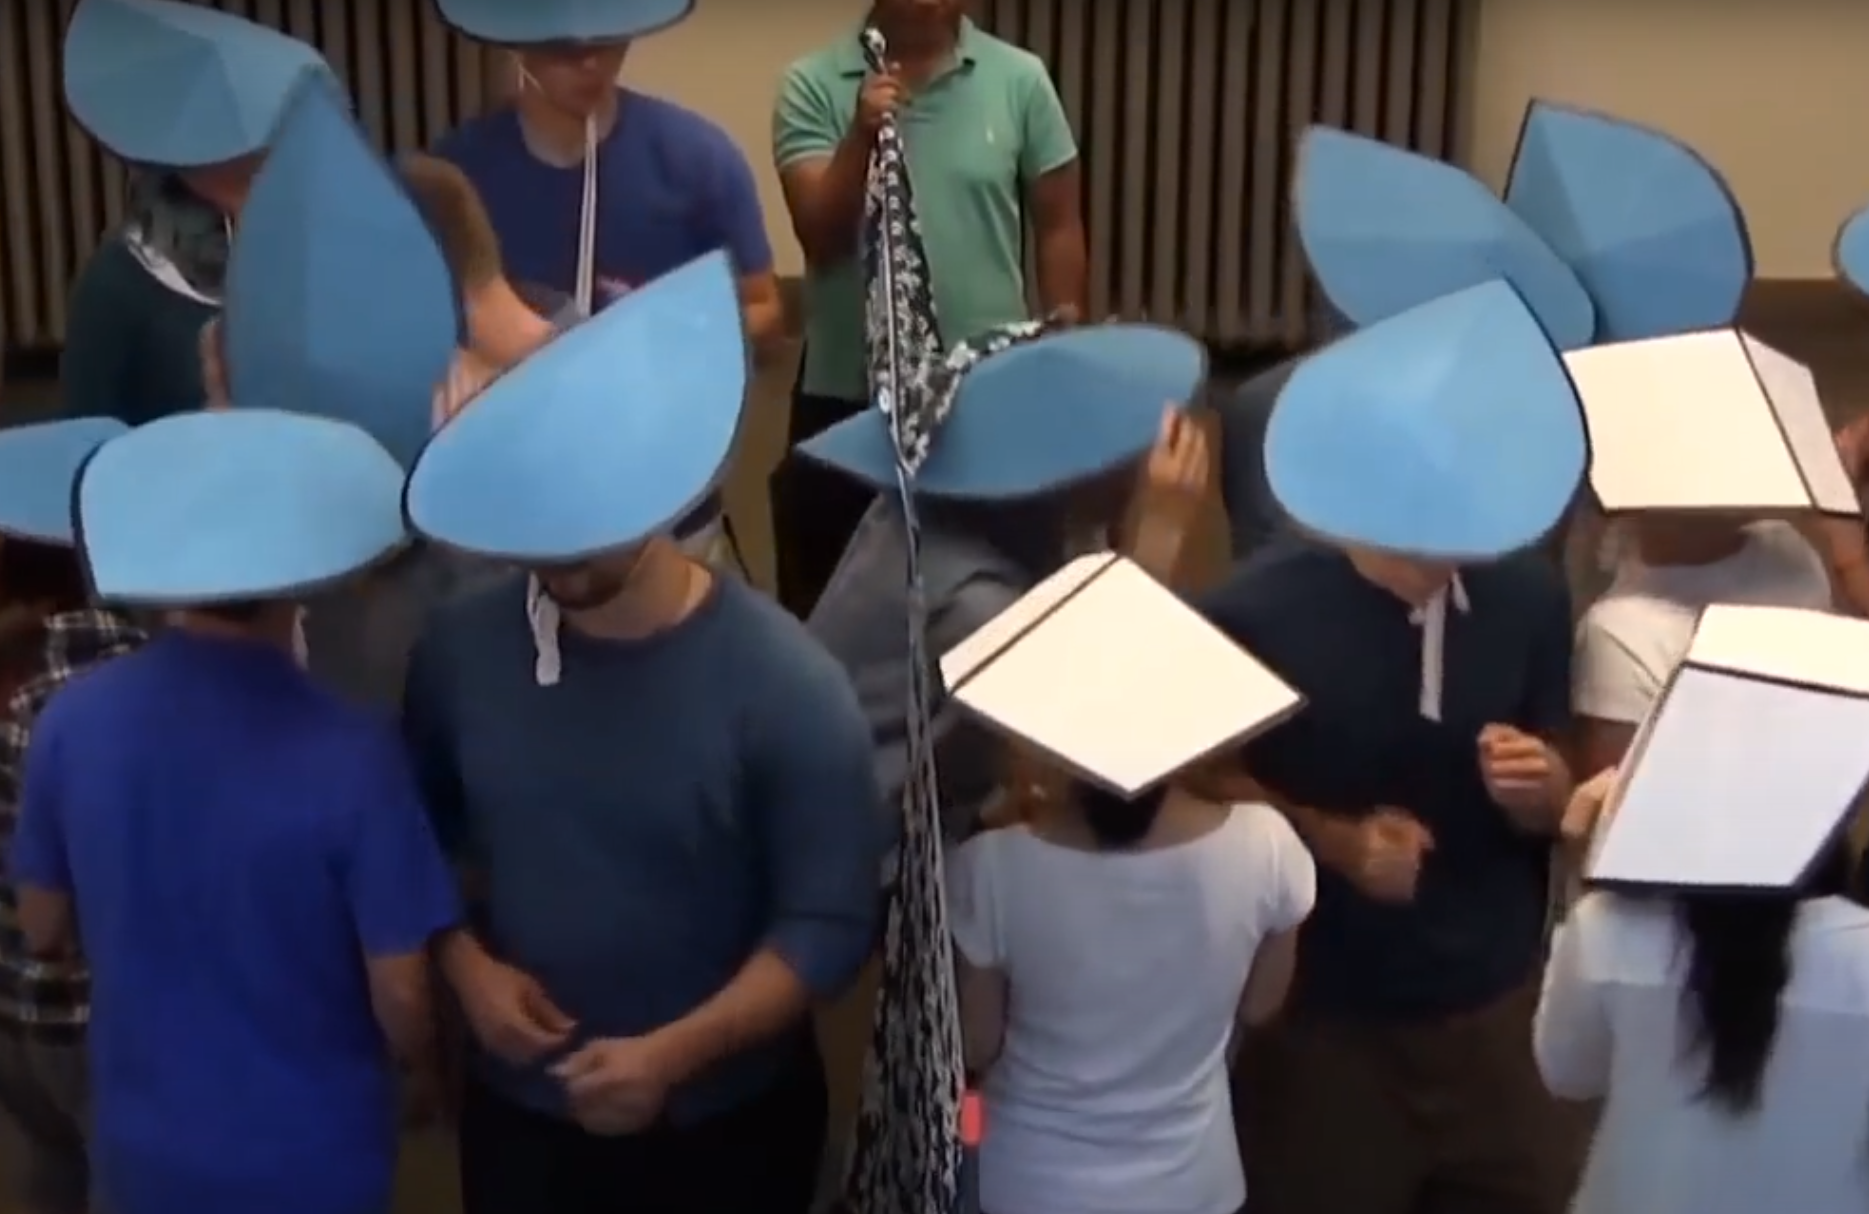 osmosis video with hats